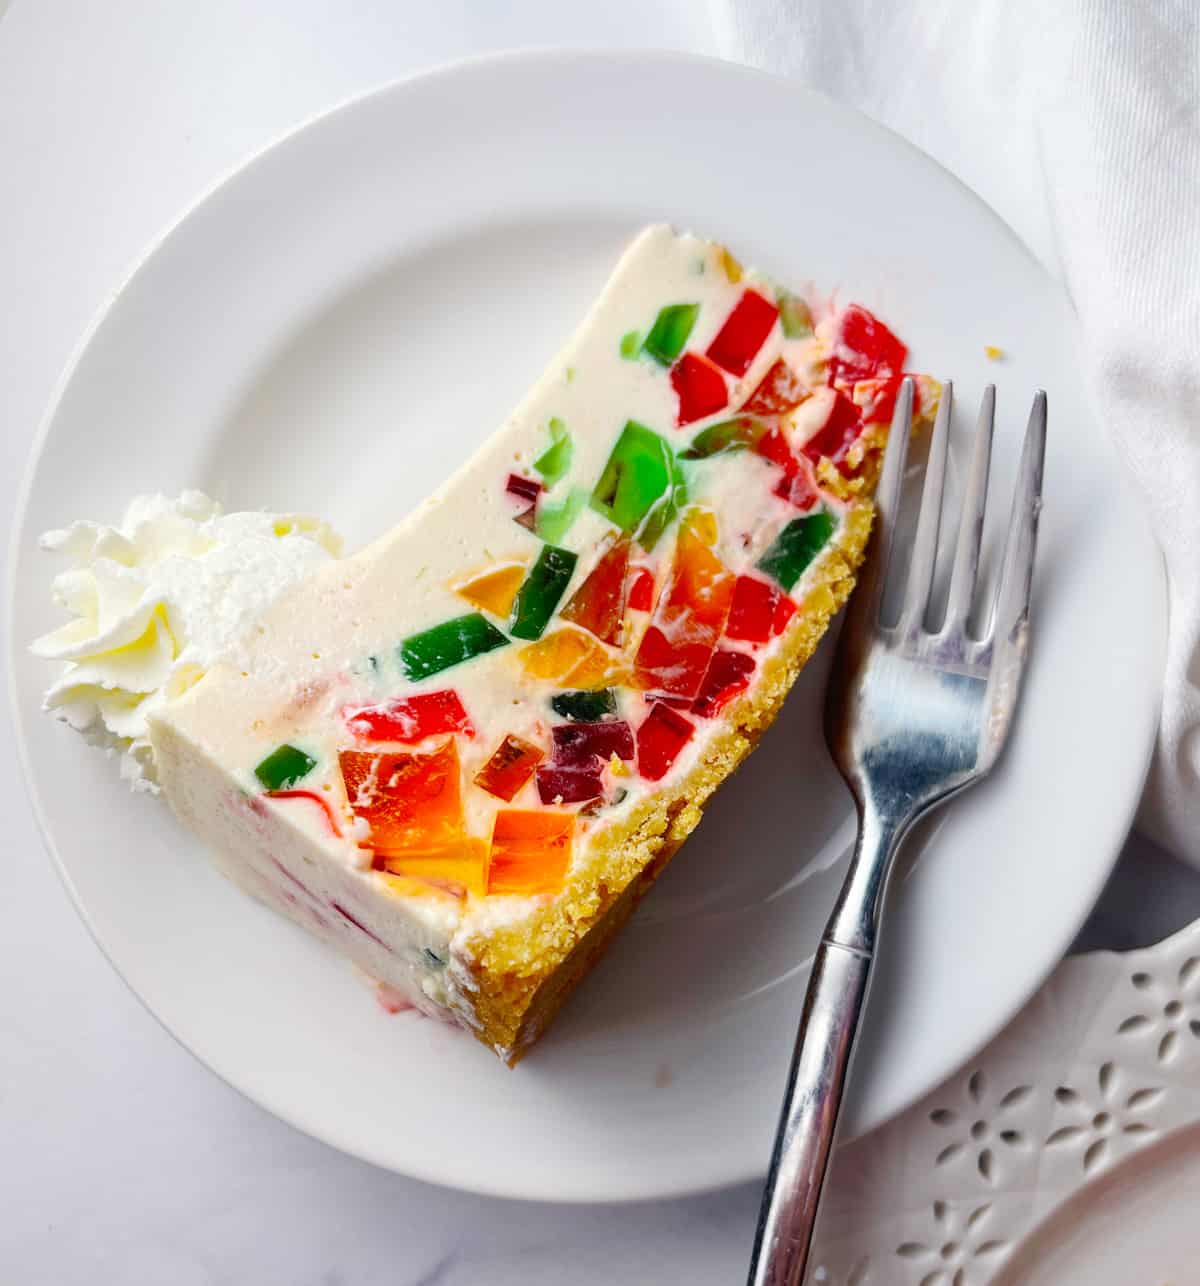 Prism cake on a white plate with fork.